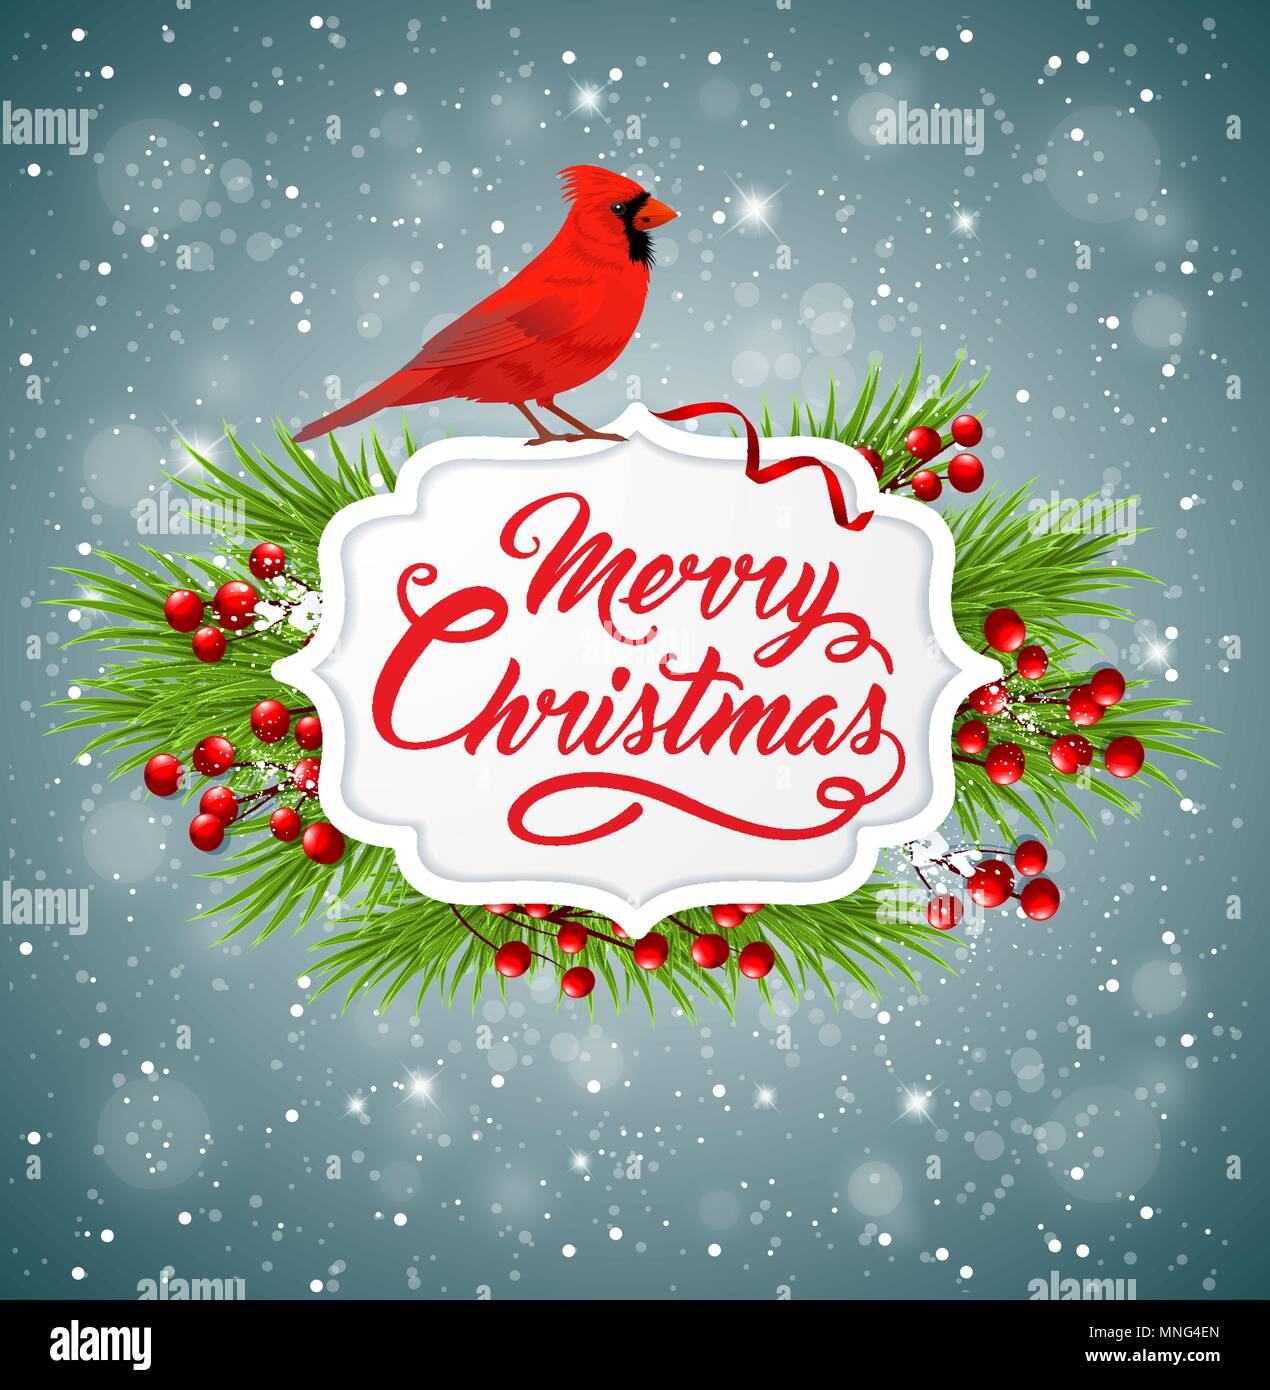 Vector Christmas banner with red cardinal bird, fir branch and greeting inscription. Merry Christmas lettering Stock Vector